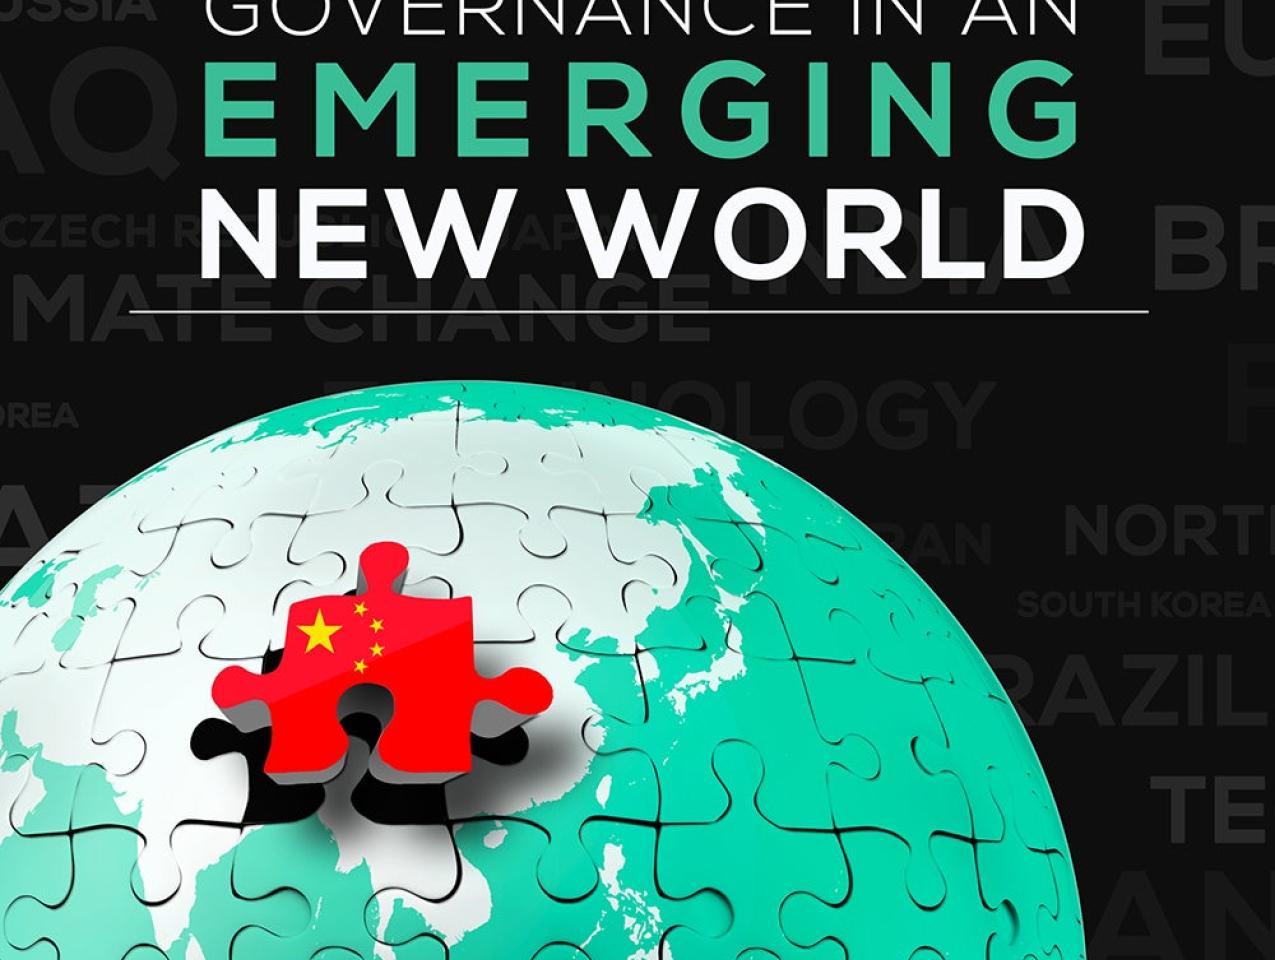 Image for Governance In An Emerging New World: China